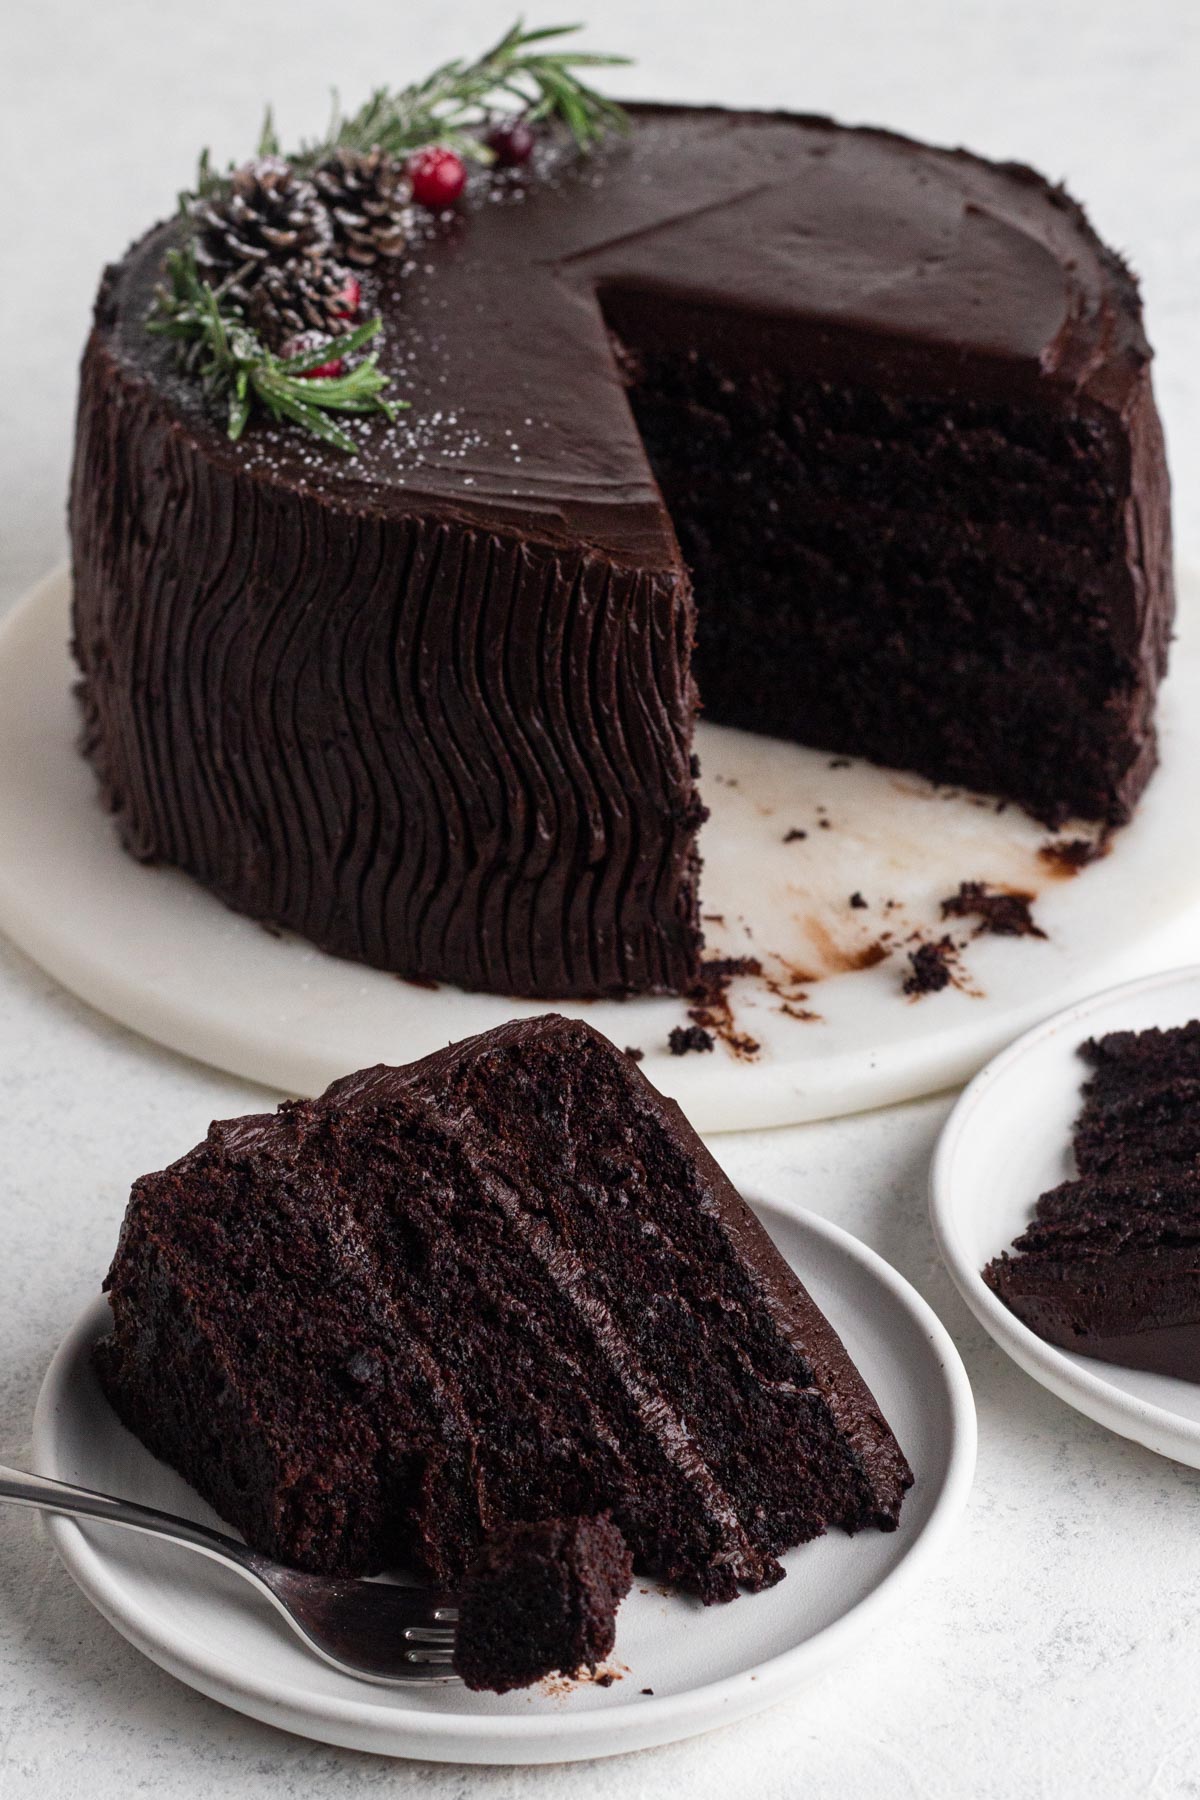 Chocolate-frosted chocolate cake on a marble board with slices of the cake on white plates.